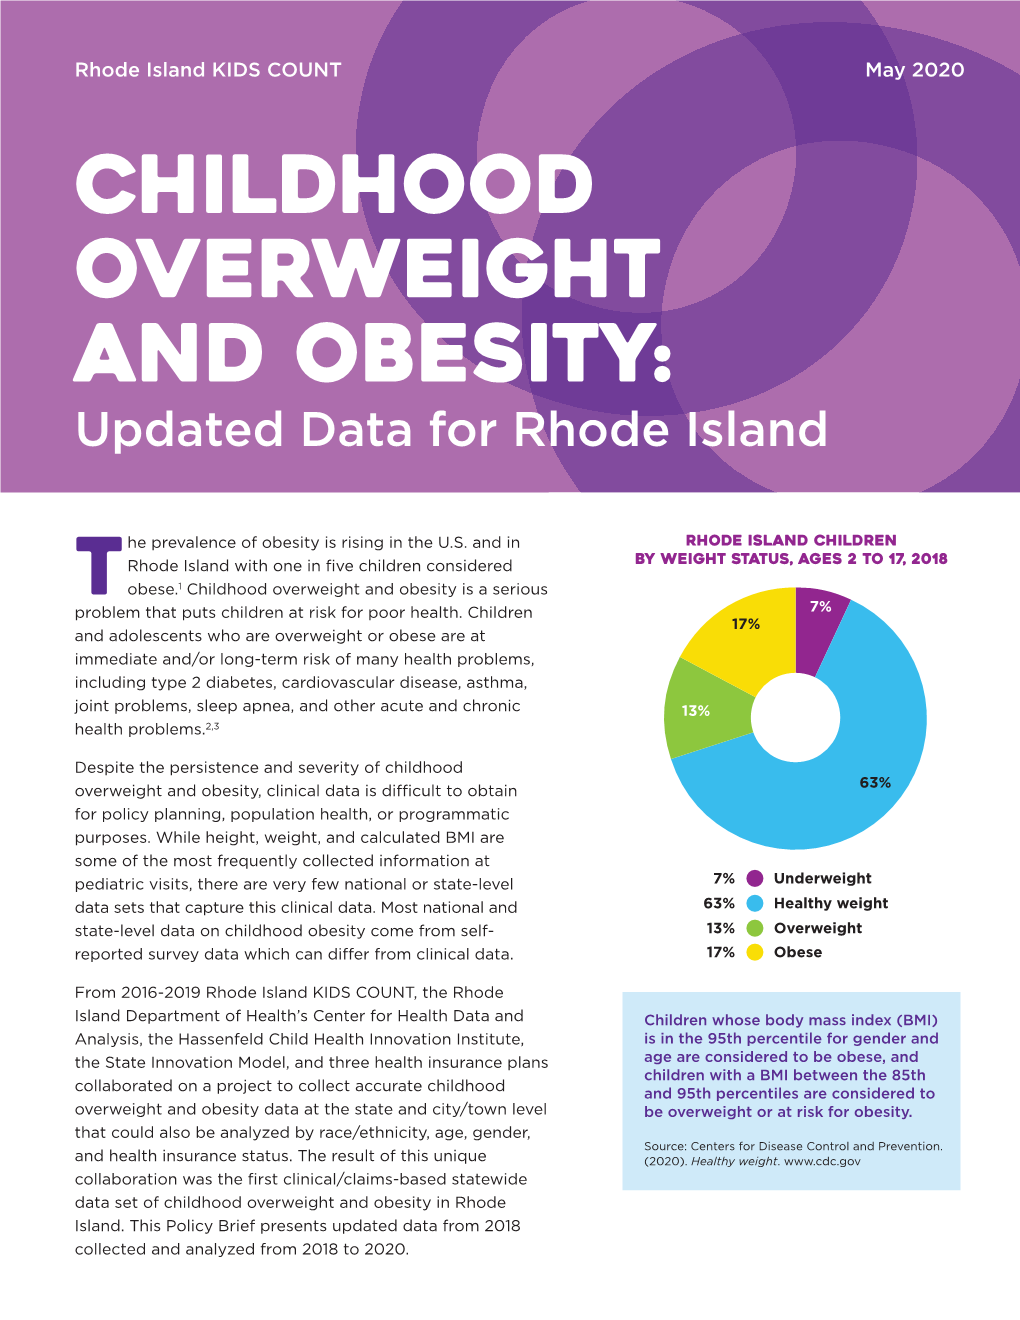 Childhood Overweight and Obesity: Updated Data for Rhode Island